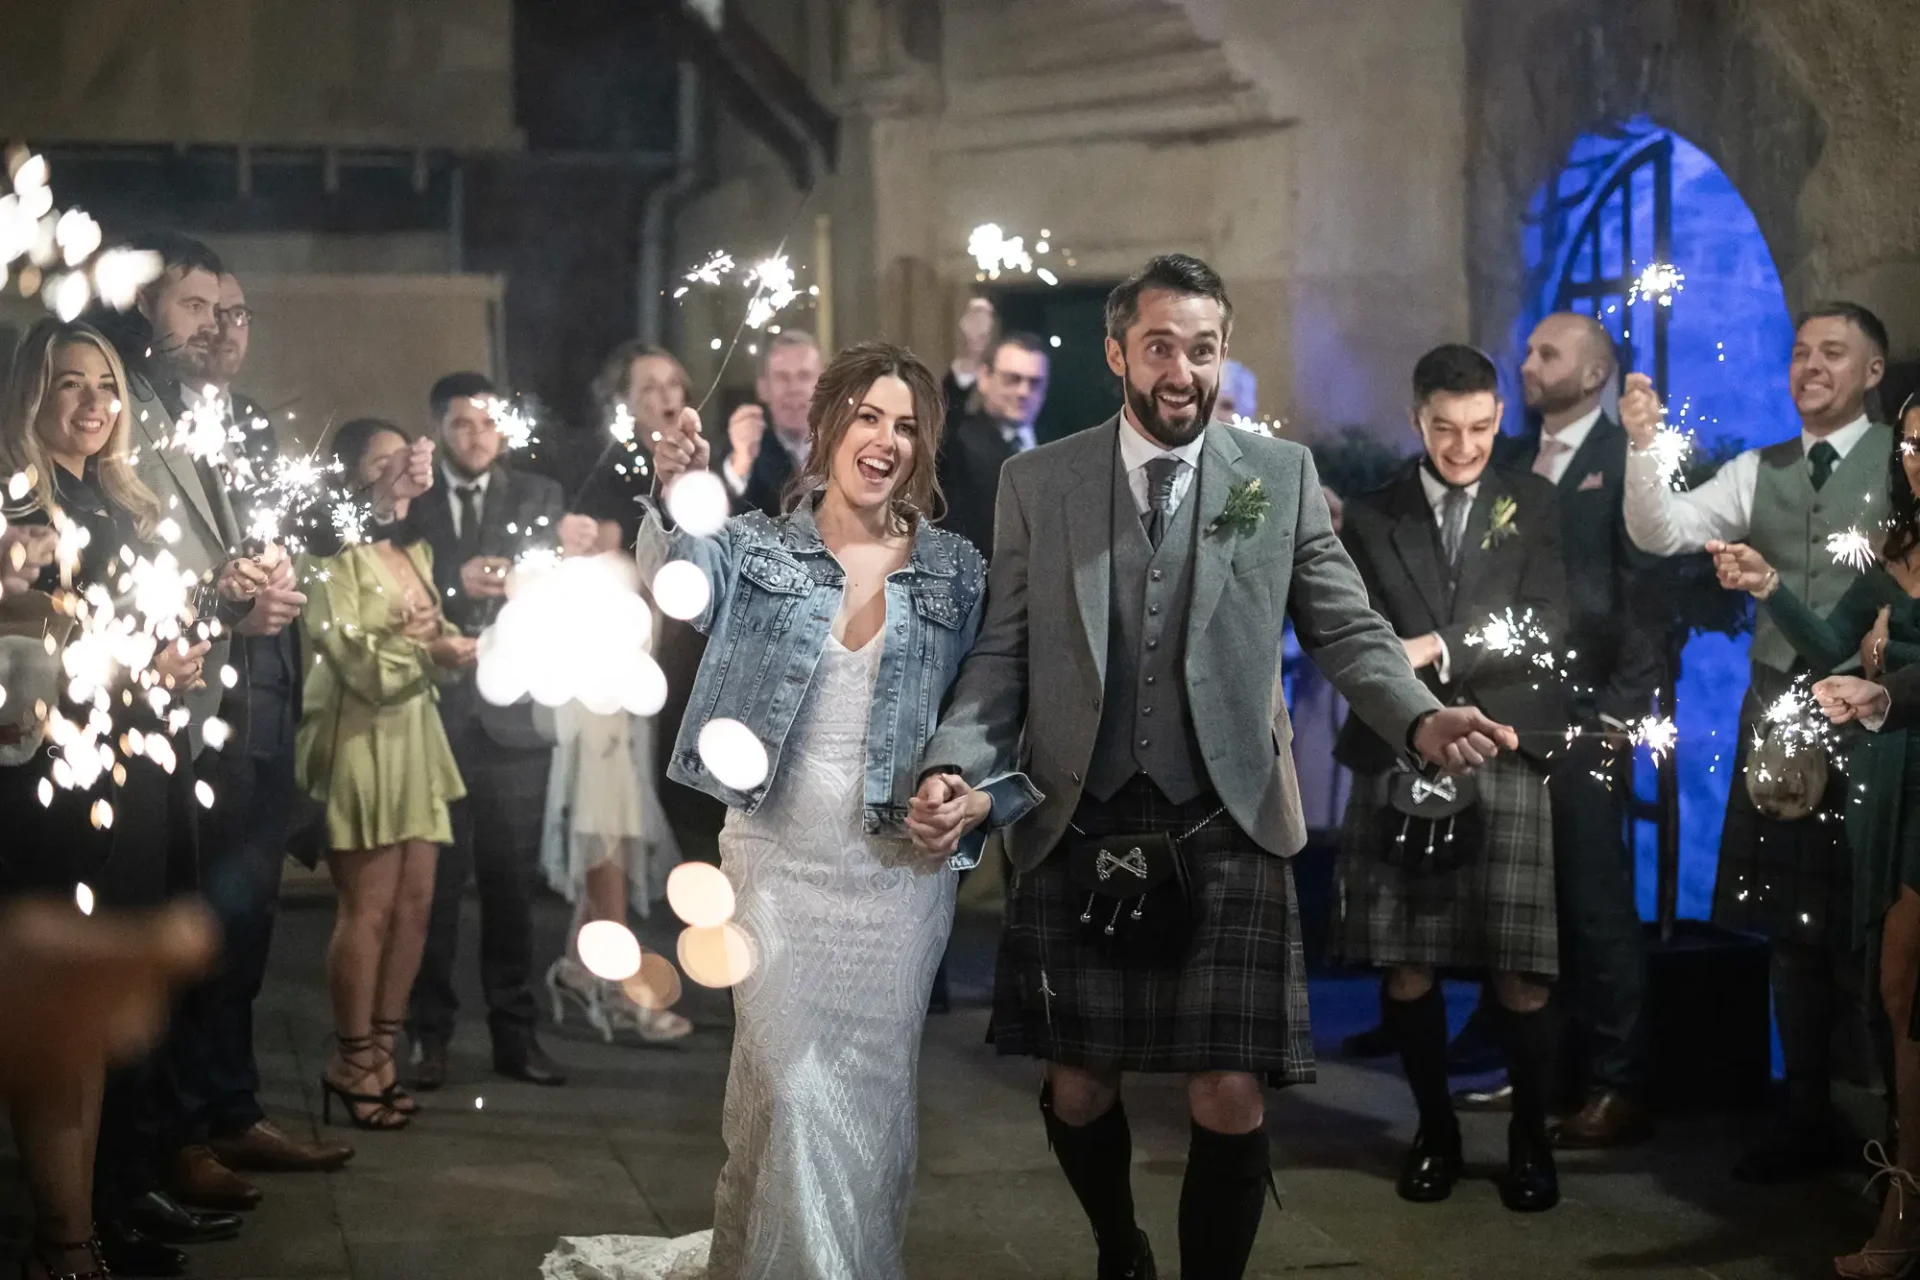 A joyful bride and groom walk hand-in-hand through a sparkler send-off, surrounded by smiling guests at nighttime. the groom is dressed in a kilt, and the bride wears a white dress and denim jacket.